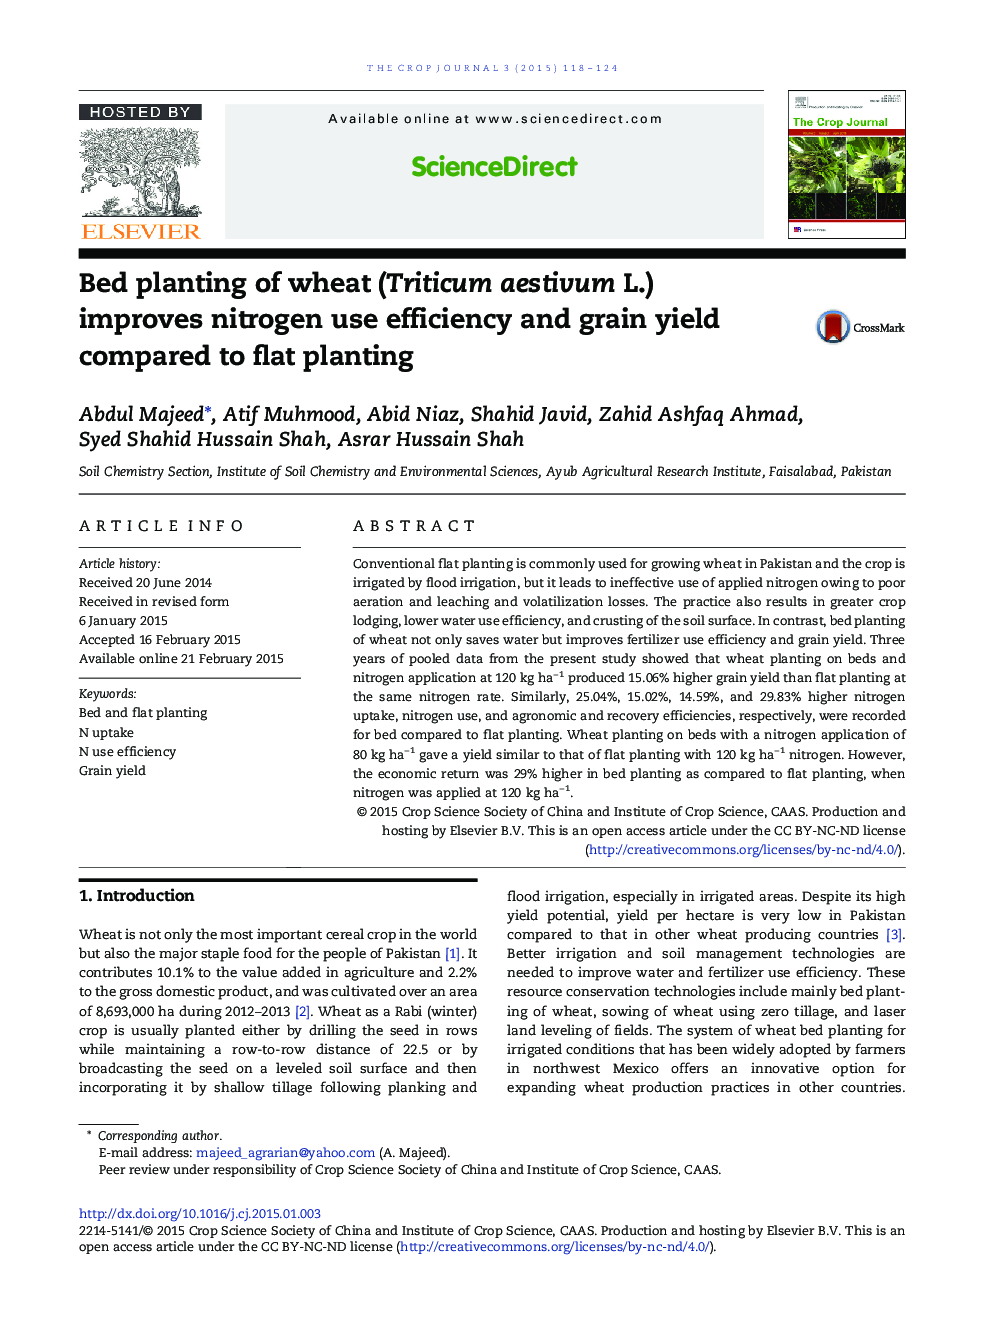 Bed planting of wheat (Triticum aestivum L.) improves nitrogen use efficiency and grain yield compared to flat planting